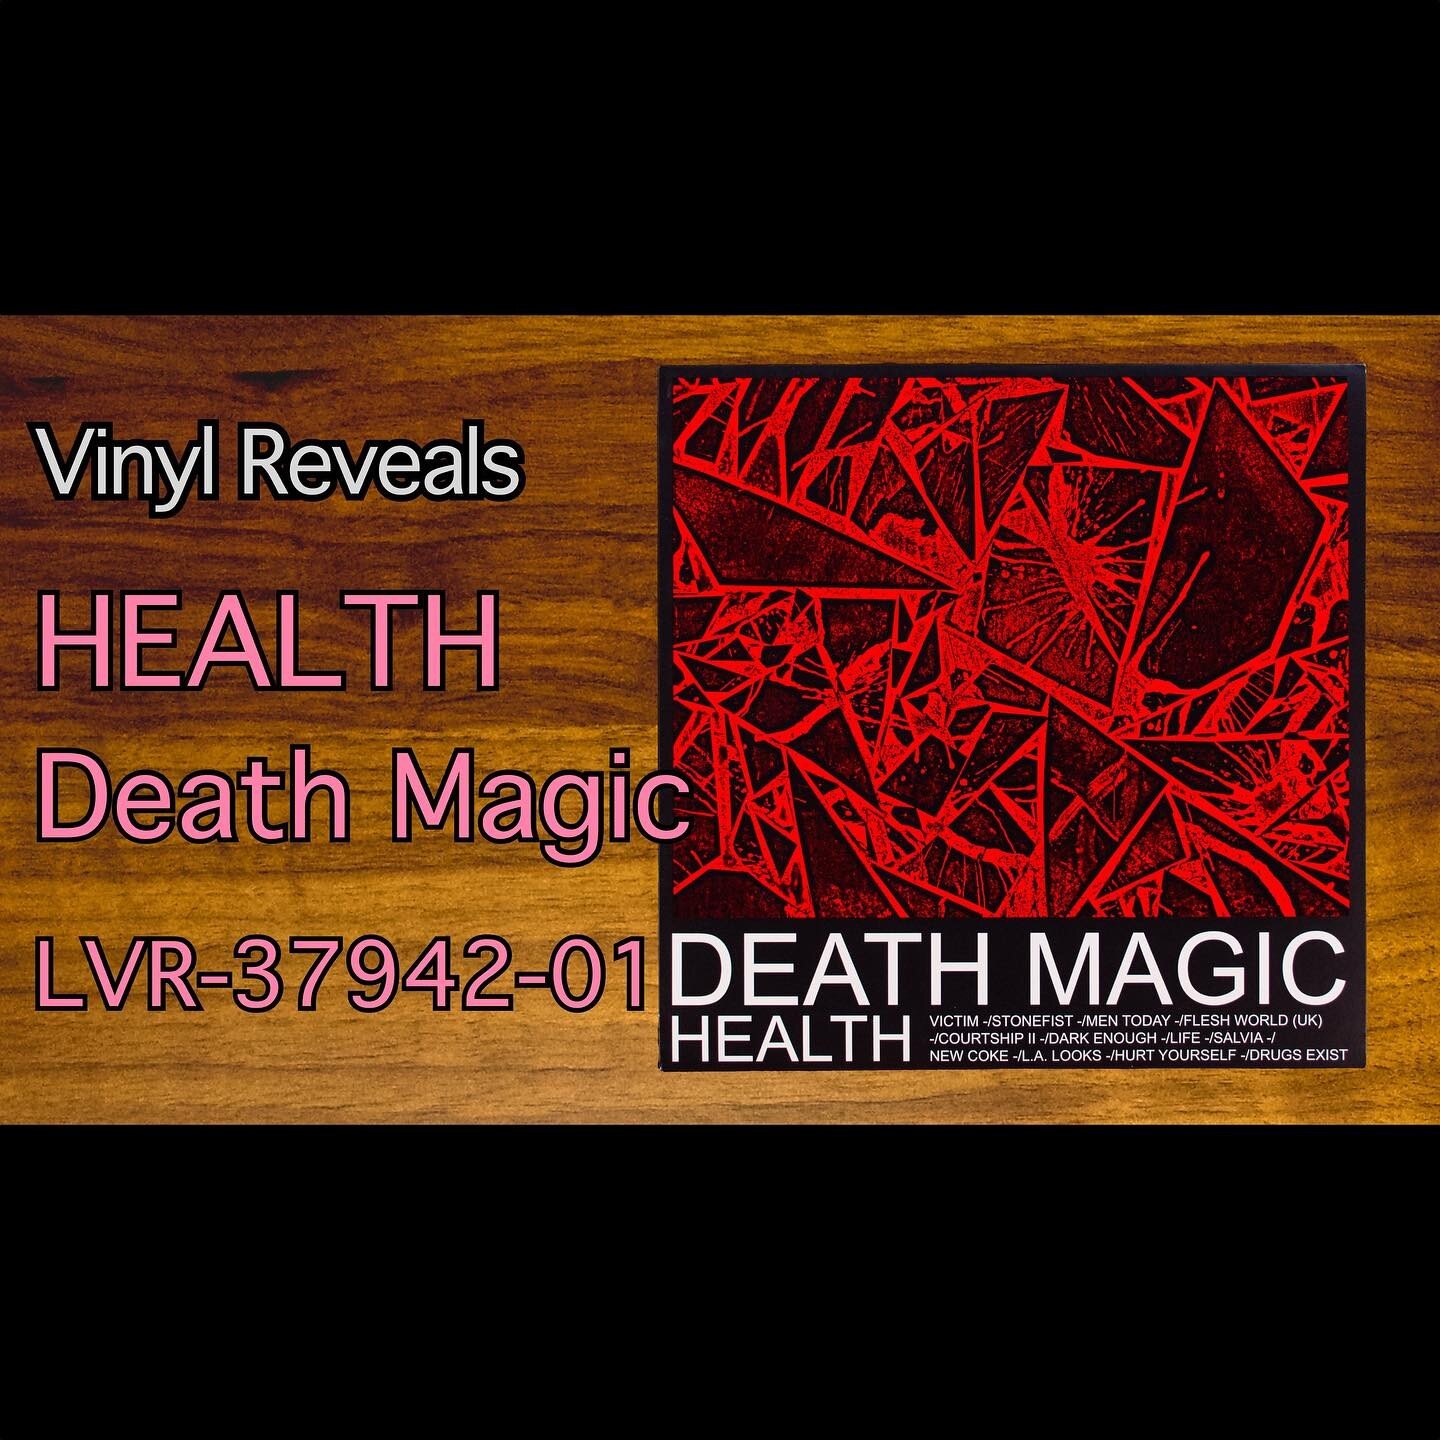 Today we are looking at Death Magic by HEALTH. Video is now live on the Vinyl Reveals YouTube channel. Link in profile.

#vinylReveal #vinyl #vinylcollection #vinylrecords #records #vinylReveals #vinylcommunity @_health_